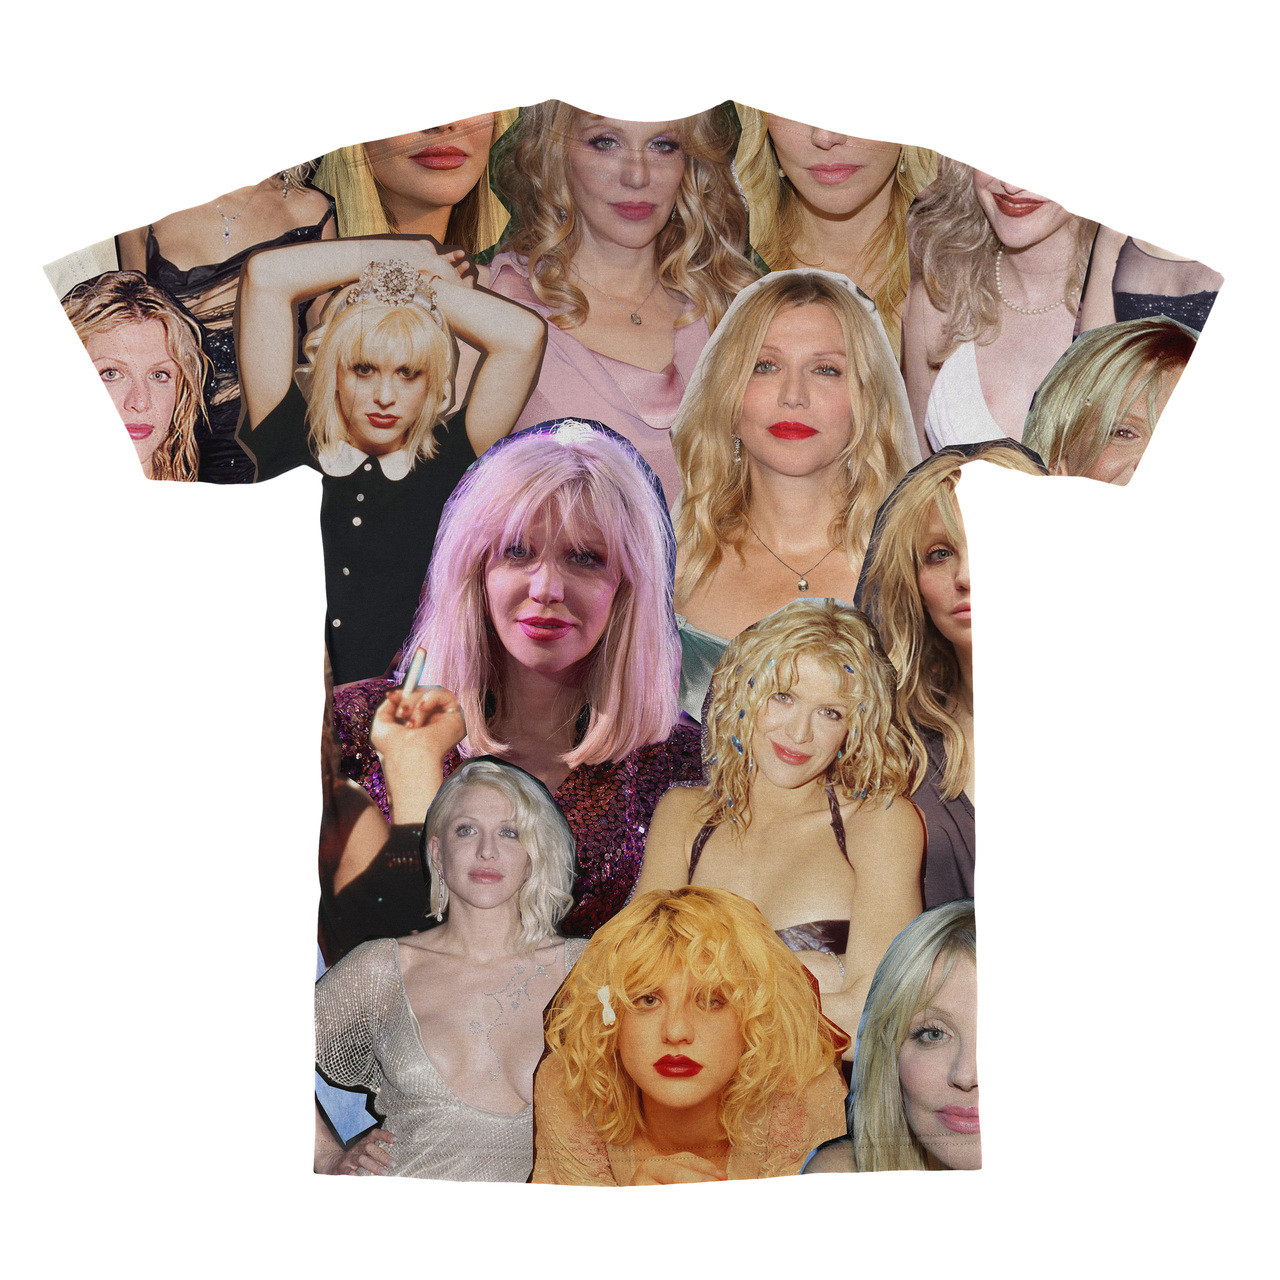 Courtney Love Photo Collage T-Shirt - Subliworks